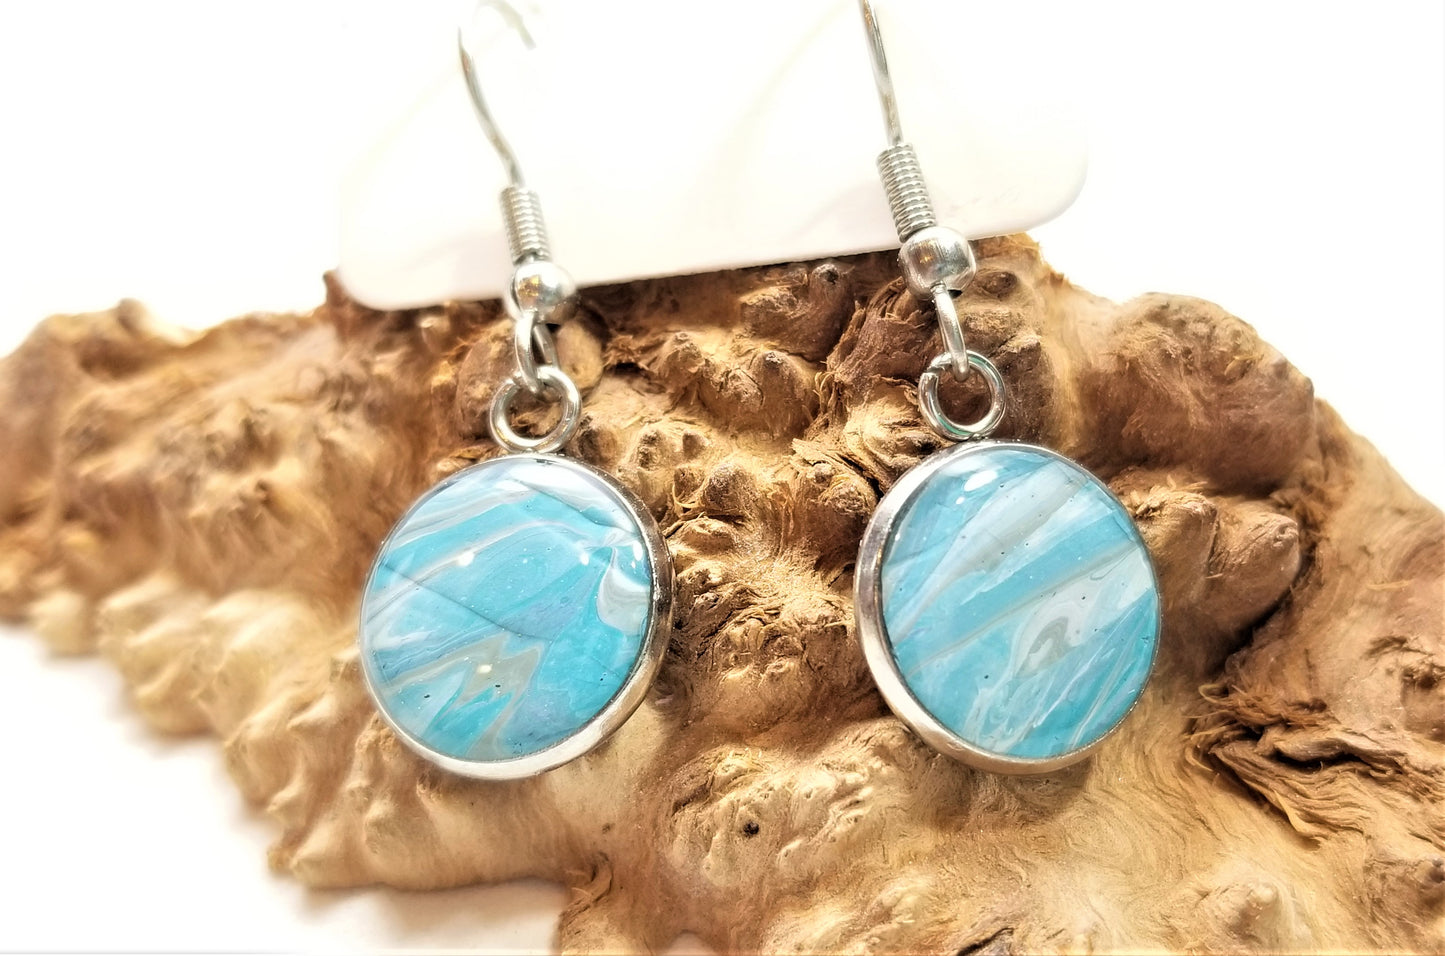 Acrylic Pour Skin with Resin Dome / Silver Wire Hook Earrings